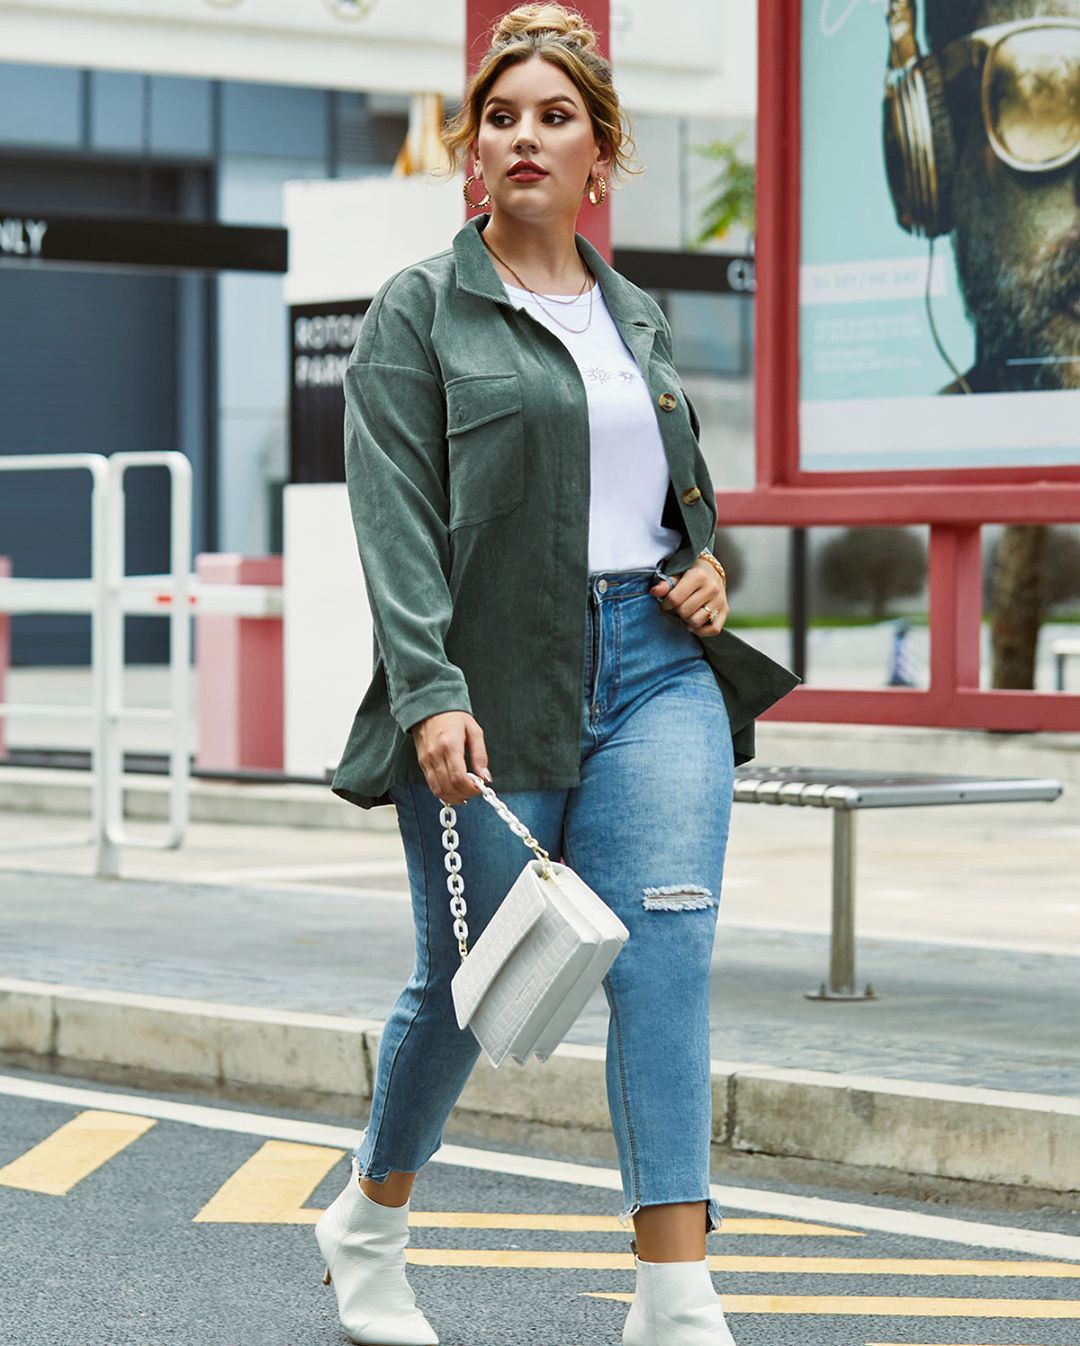 Rosegal - Plus Size Front Coat⁣
Search ID: 469356101  on Rosegal.com⁣
Use Code: RGH20 to enjoy 18% off!⁣
#rosegal #plussizefashion #Rosegalcurvygirl #curvygirl⁣
Note: How to find the item, please chec...